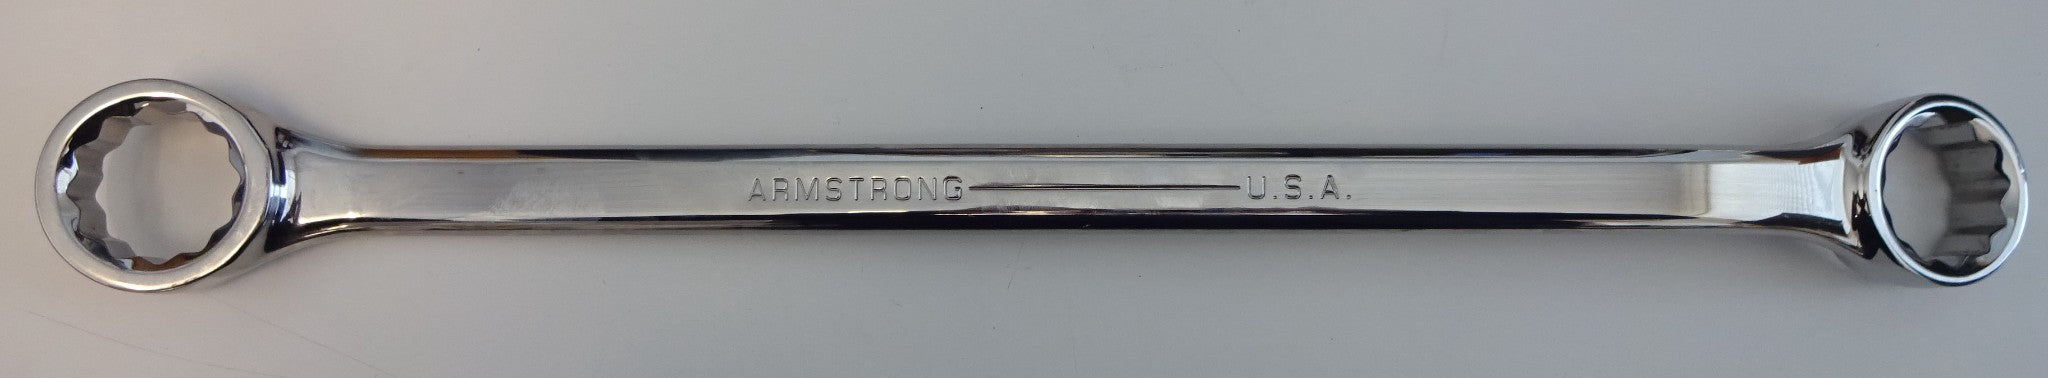 Armstrong 26-778FP 1-5/16" x 1-1/4" Offset Box End Wrench Full Polish 12pt. USA